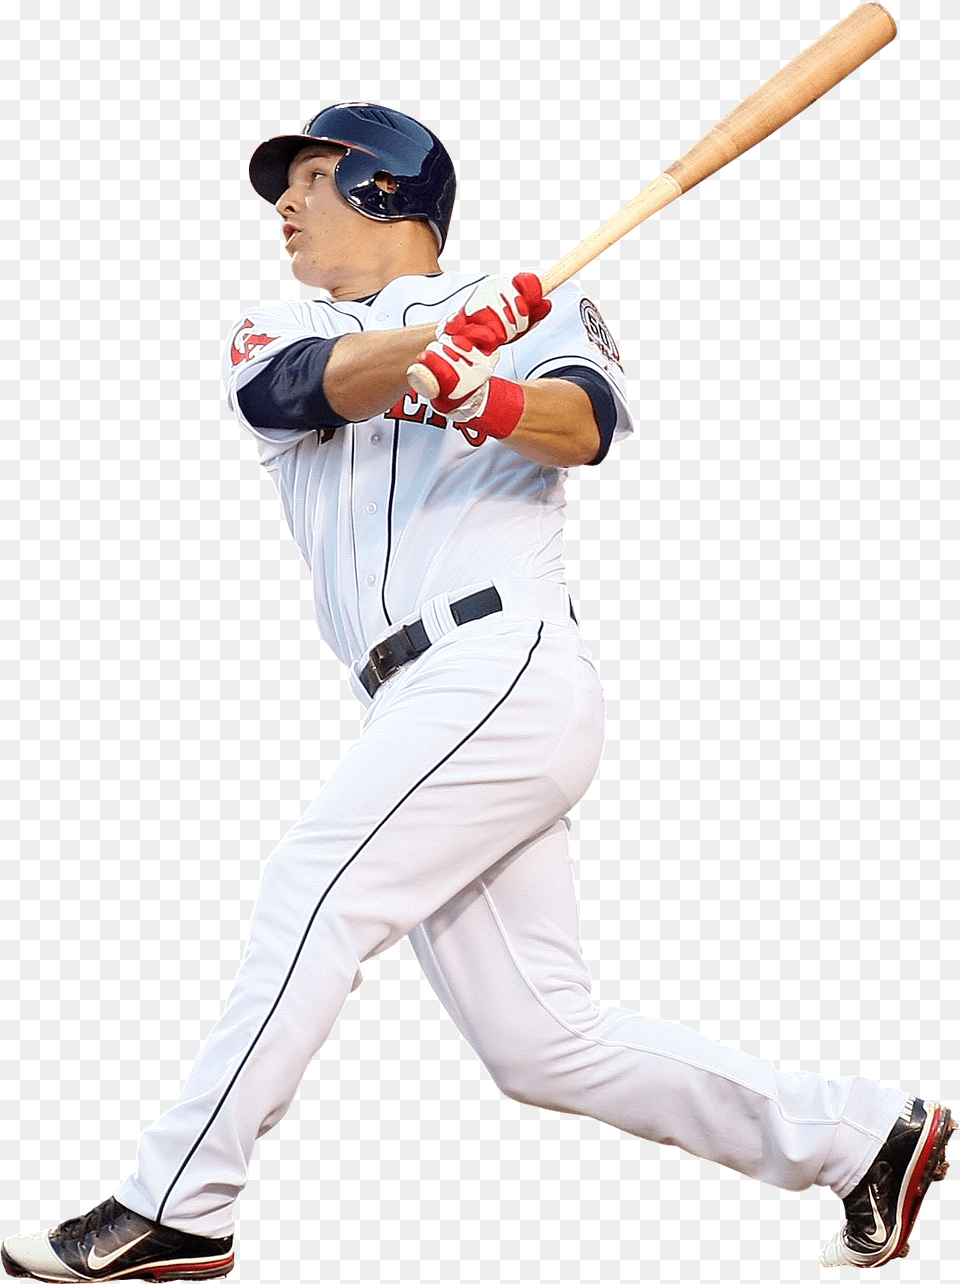 Mike Trout Collections At Sccpre Playing Baseball Transparent Gif, People, Team, Clothing, Glove Png Image